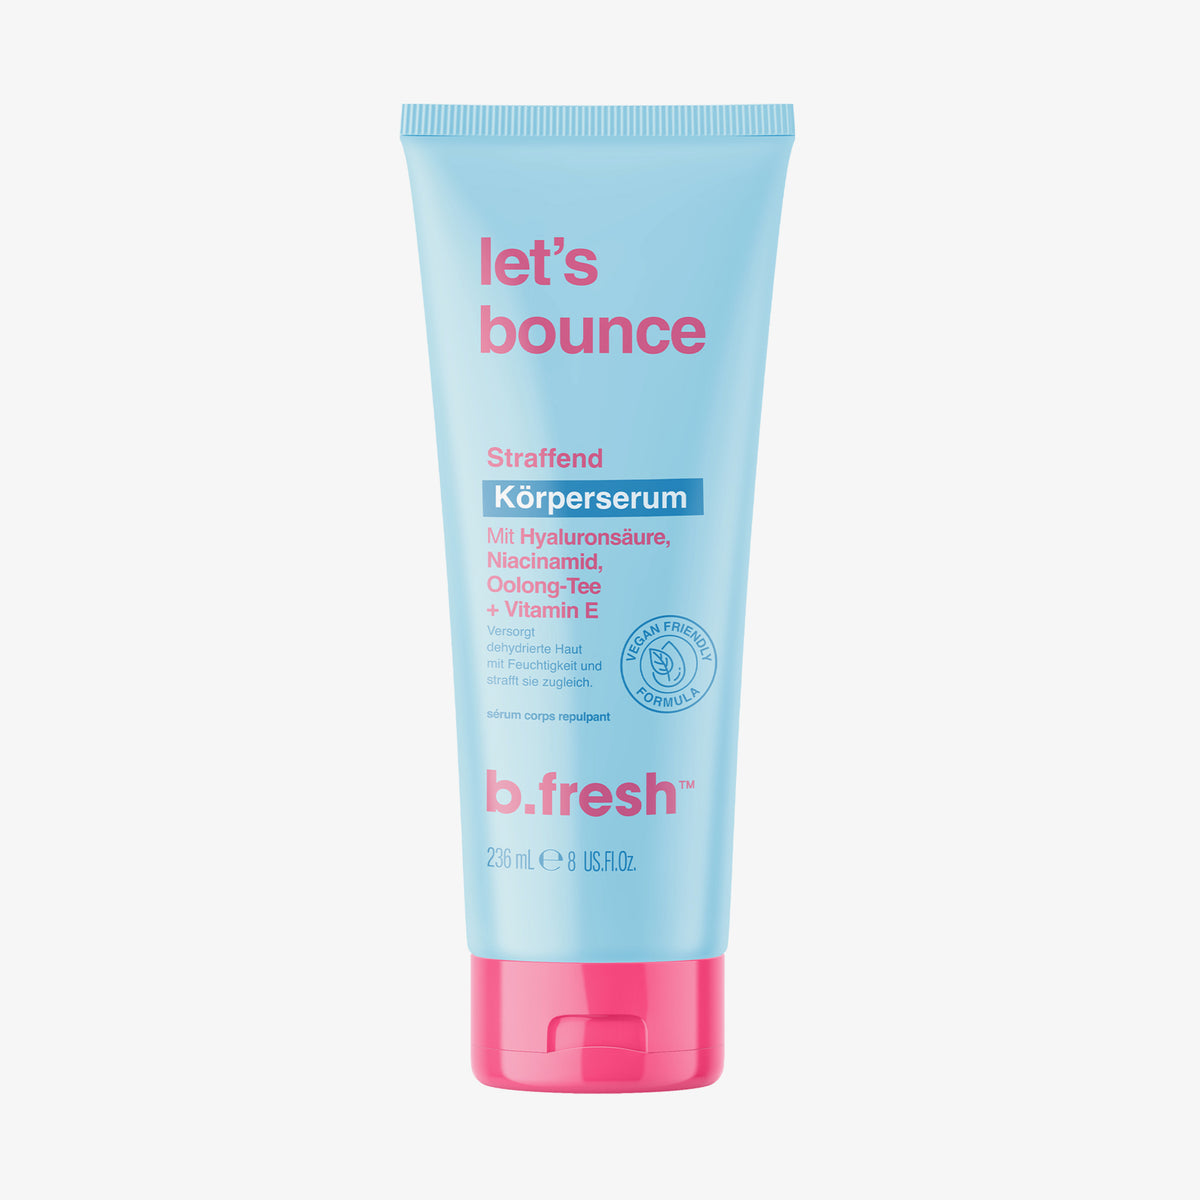 let's bounce - firming body serum